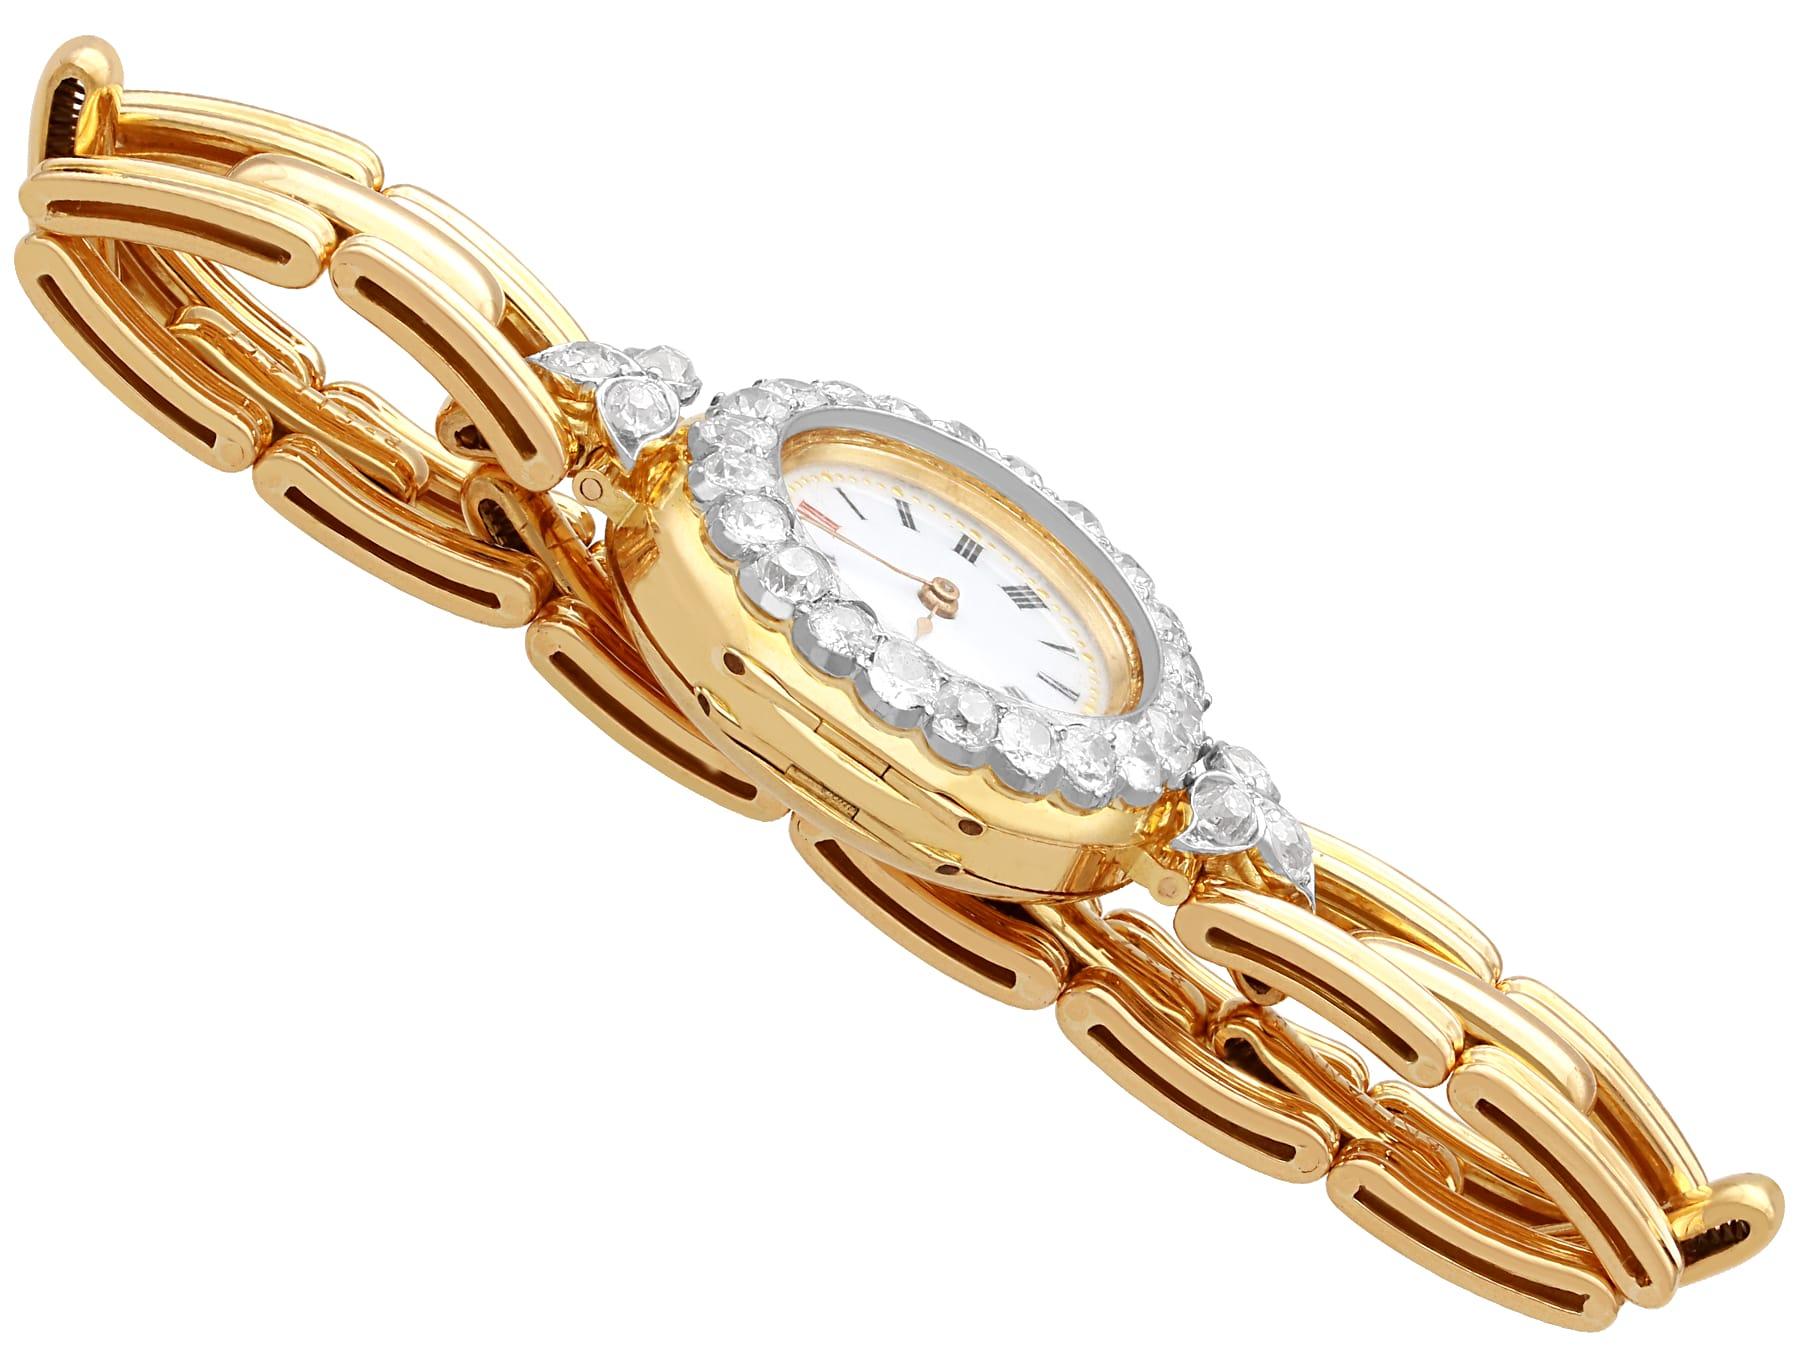 Antique Edwardian 2.75Ct Diamond and 18k Yellow Gold Cocktail Watch 1909 For Sale 2